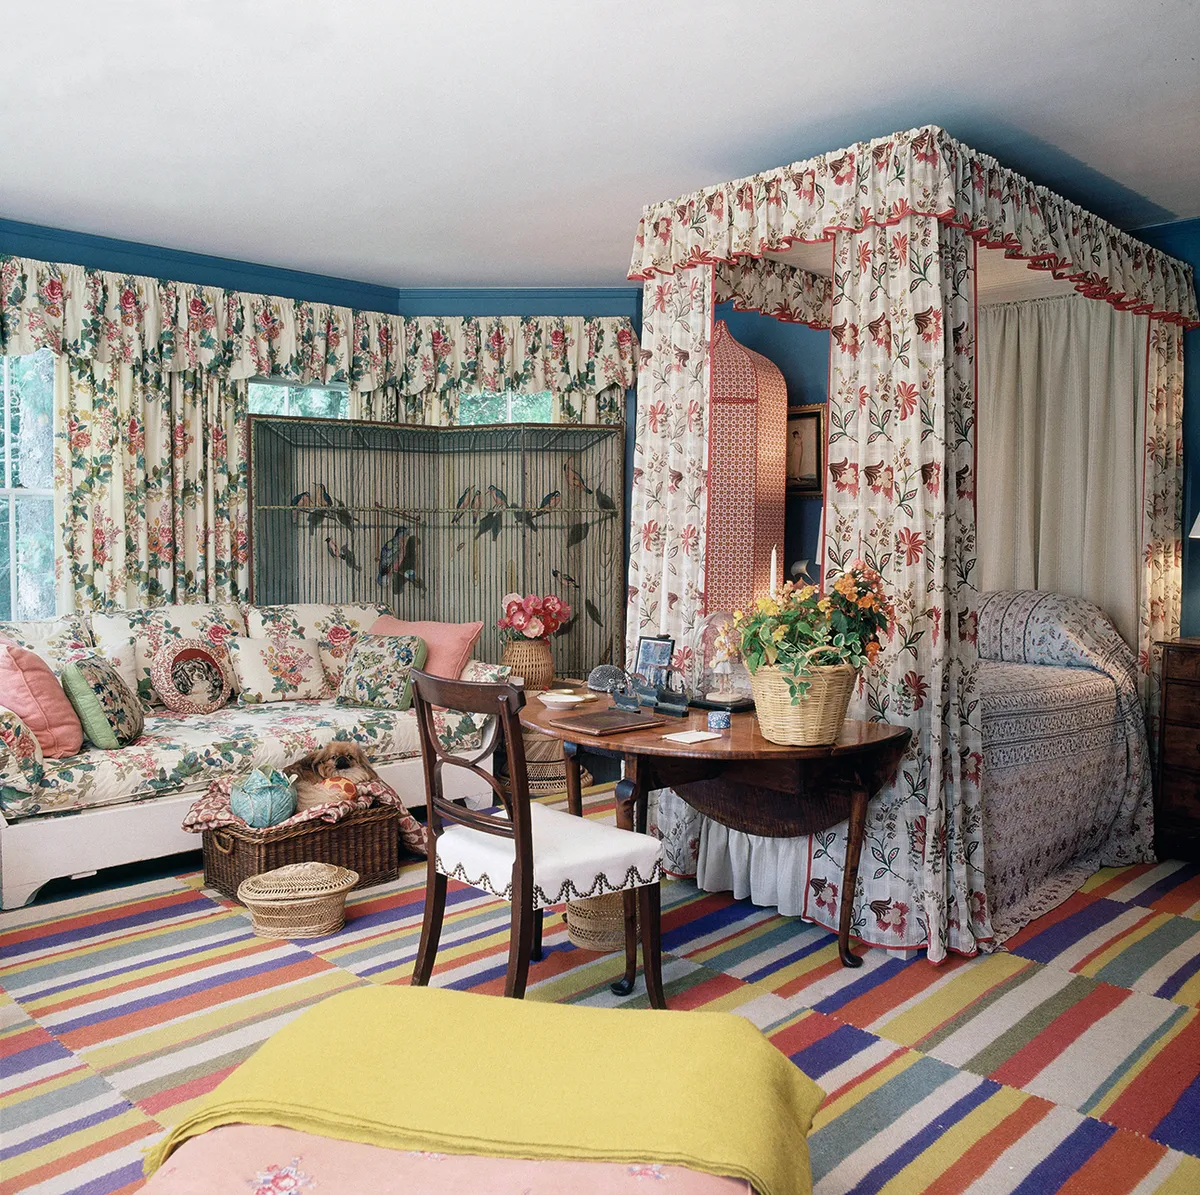 Chintz is teamed with a bold striped carpet in Sister Parish’s 1970s Maine home